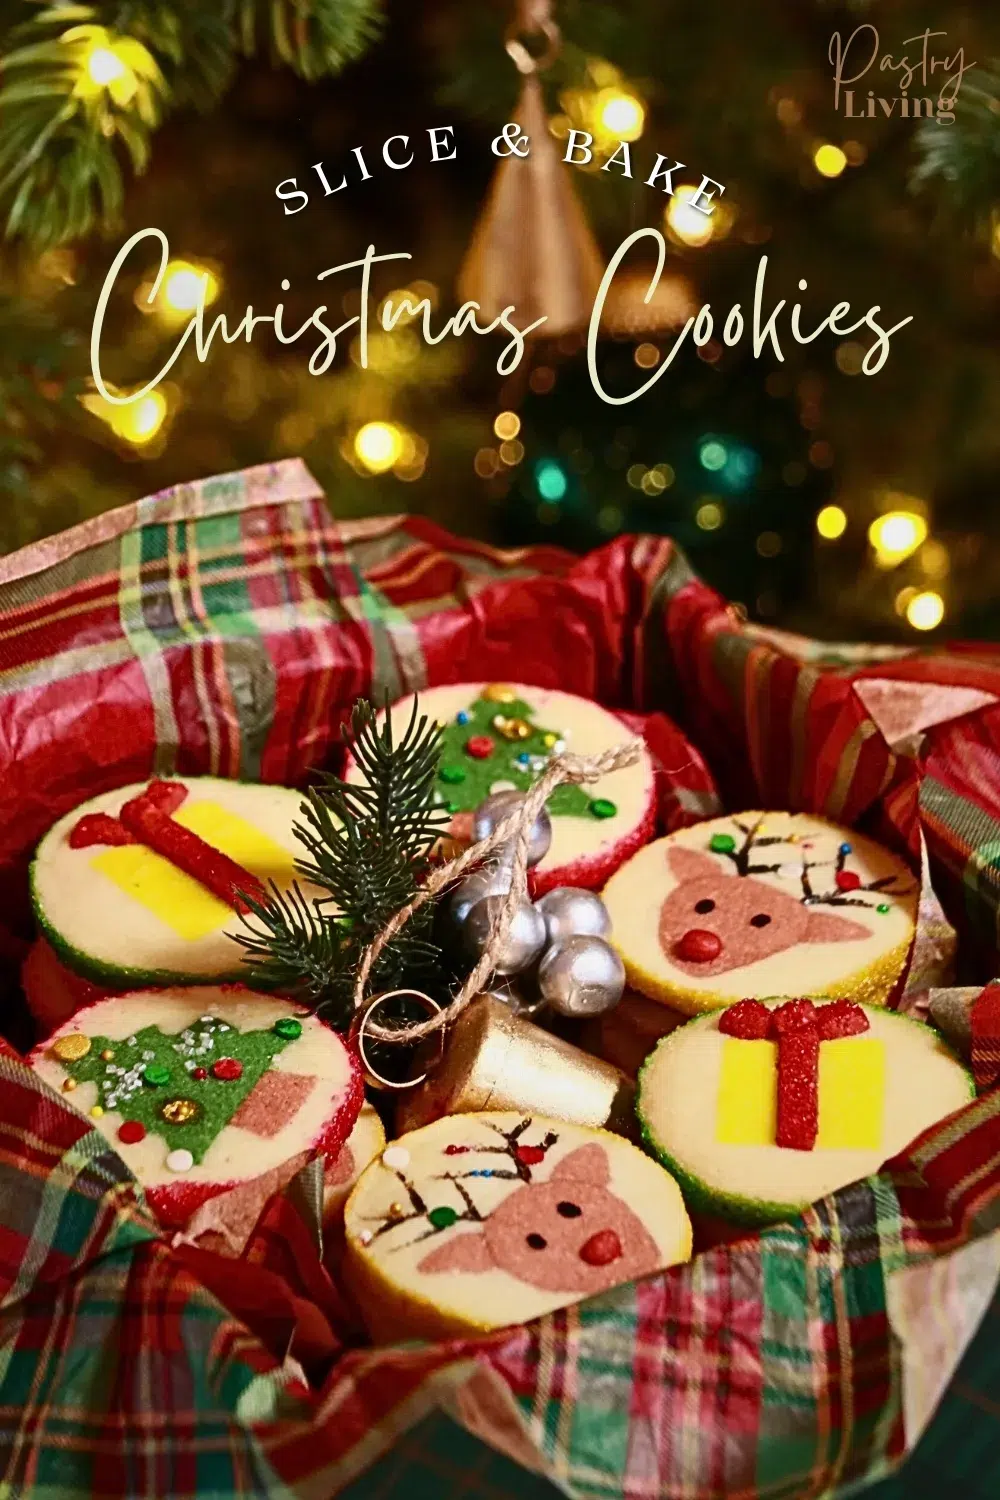 slice-and-bake christmas cookies in a gift box